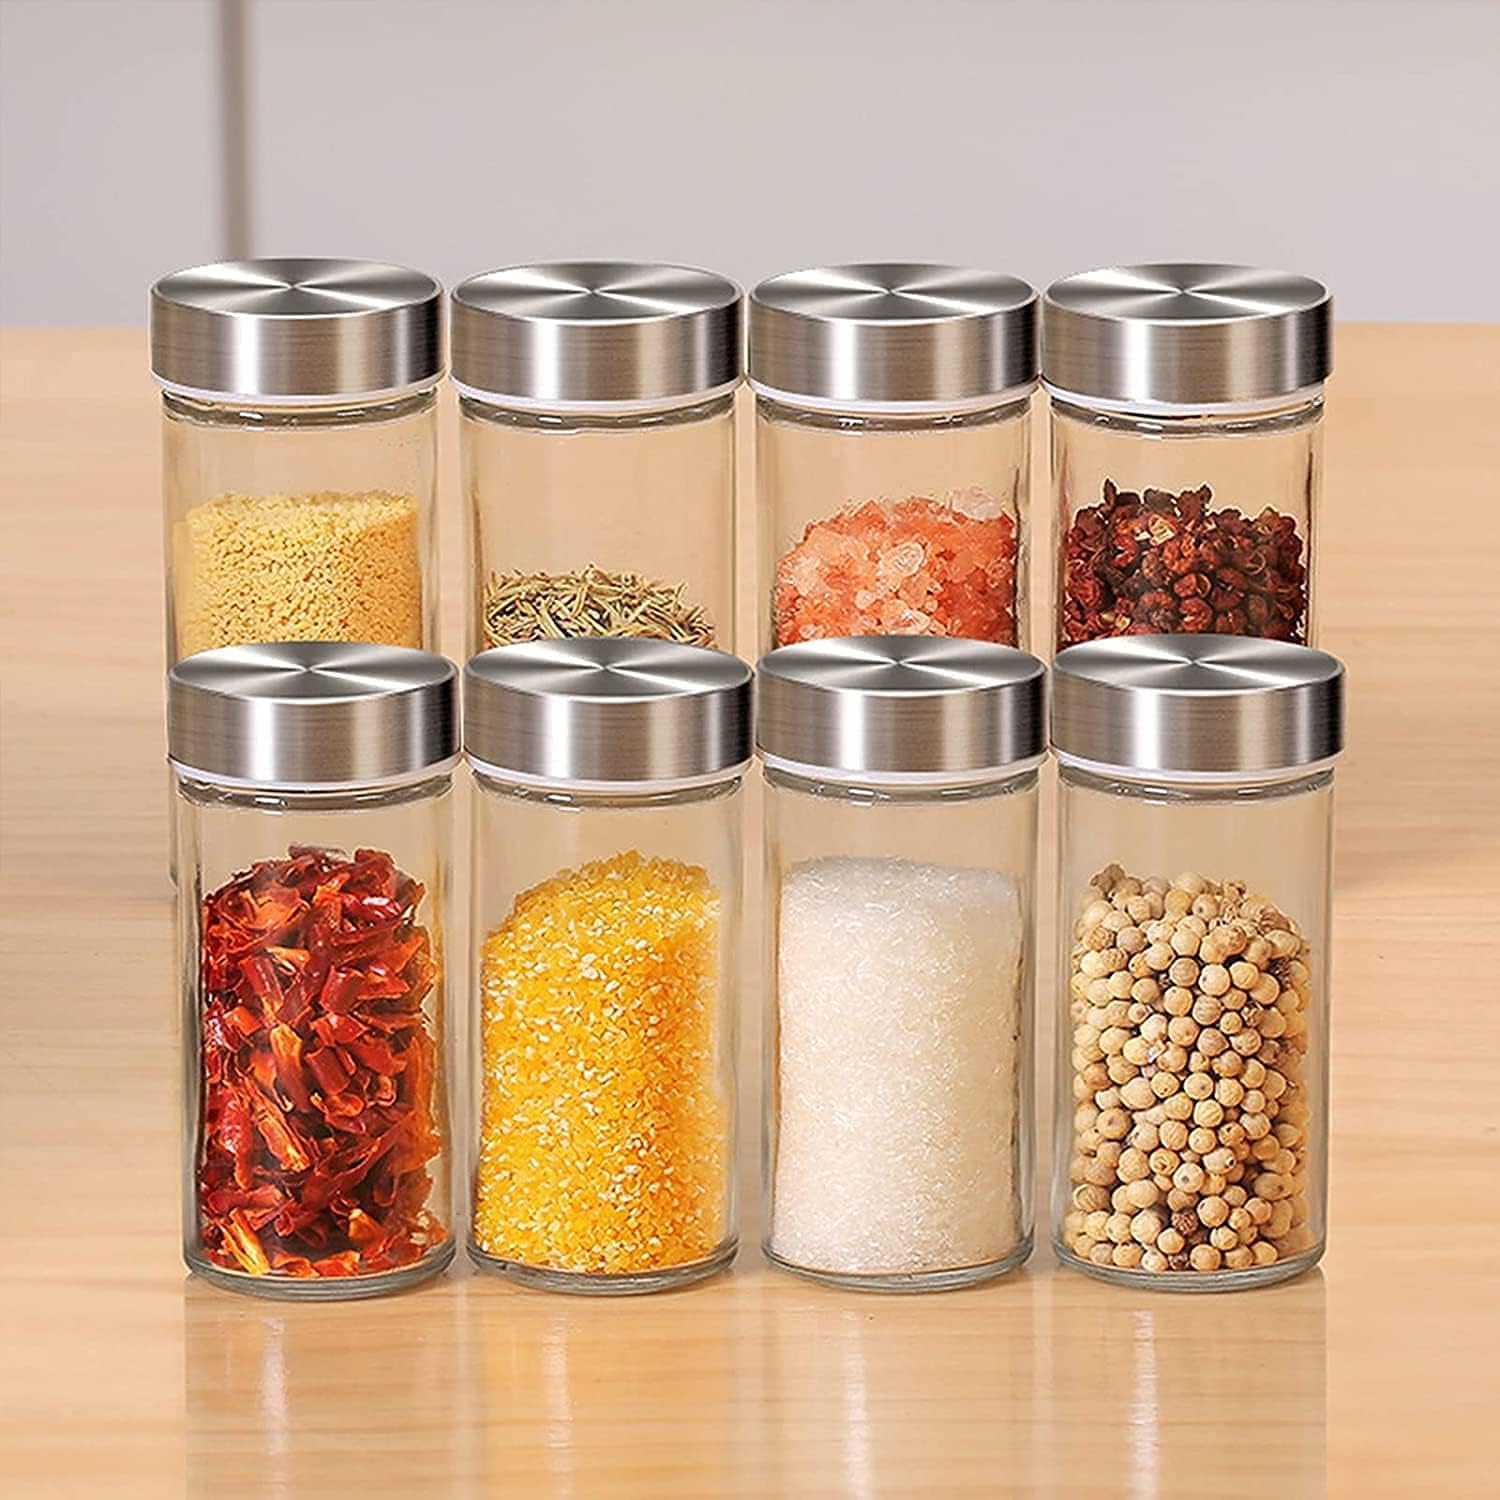 8/12 Spice Jars Carousel Stainless Steel Rotating Spice Rack